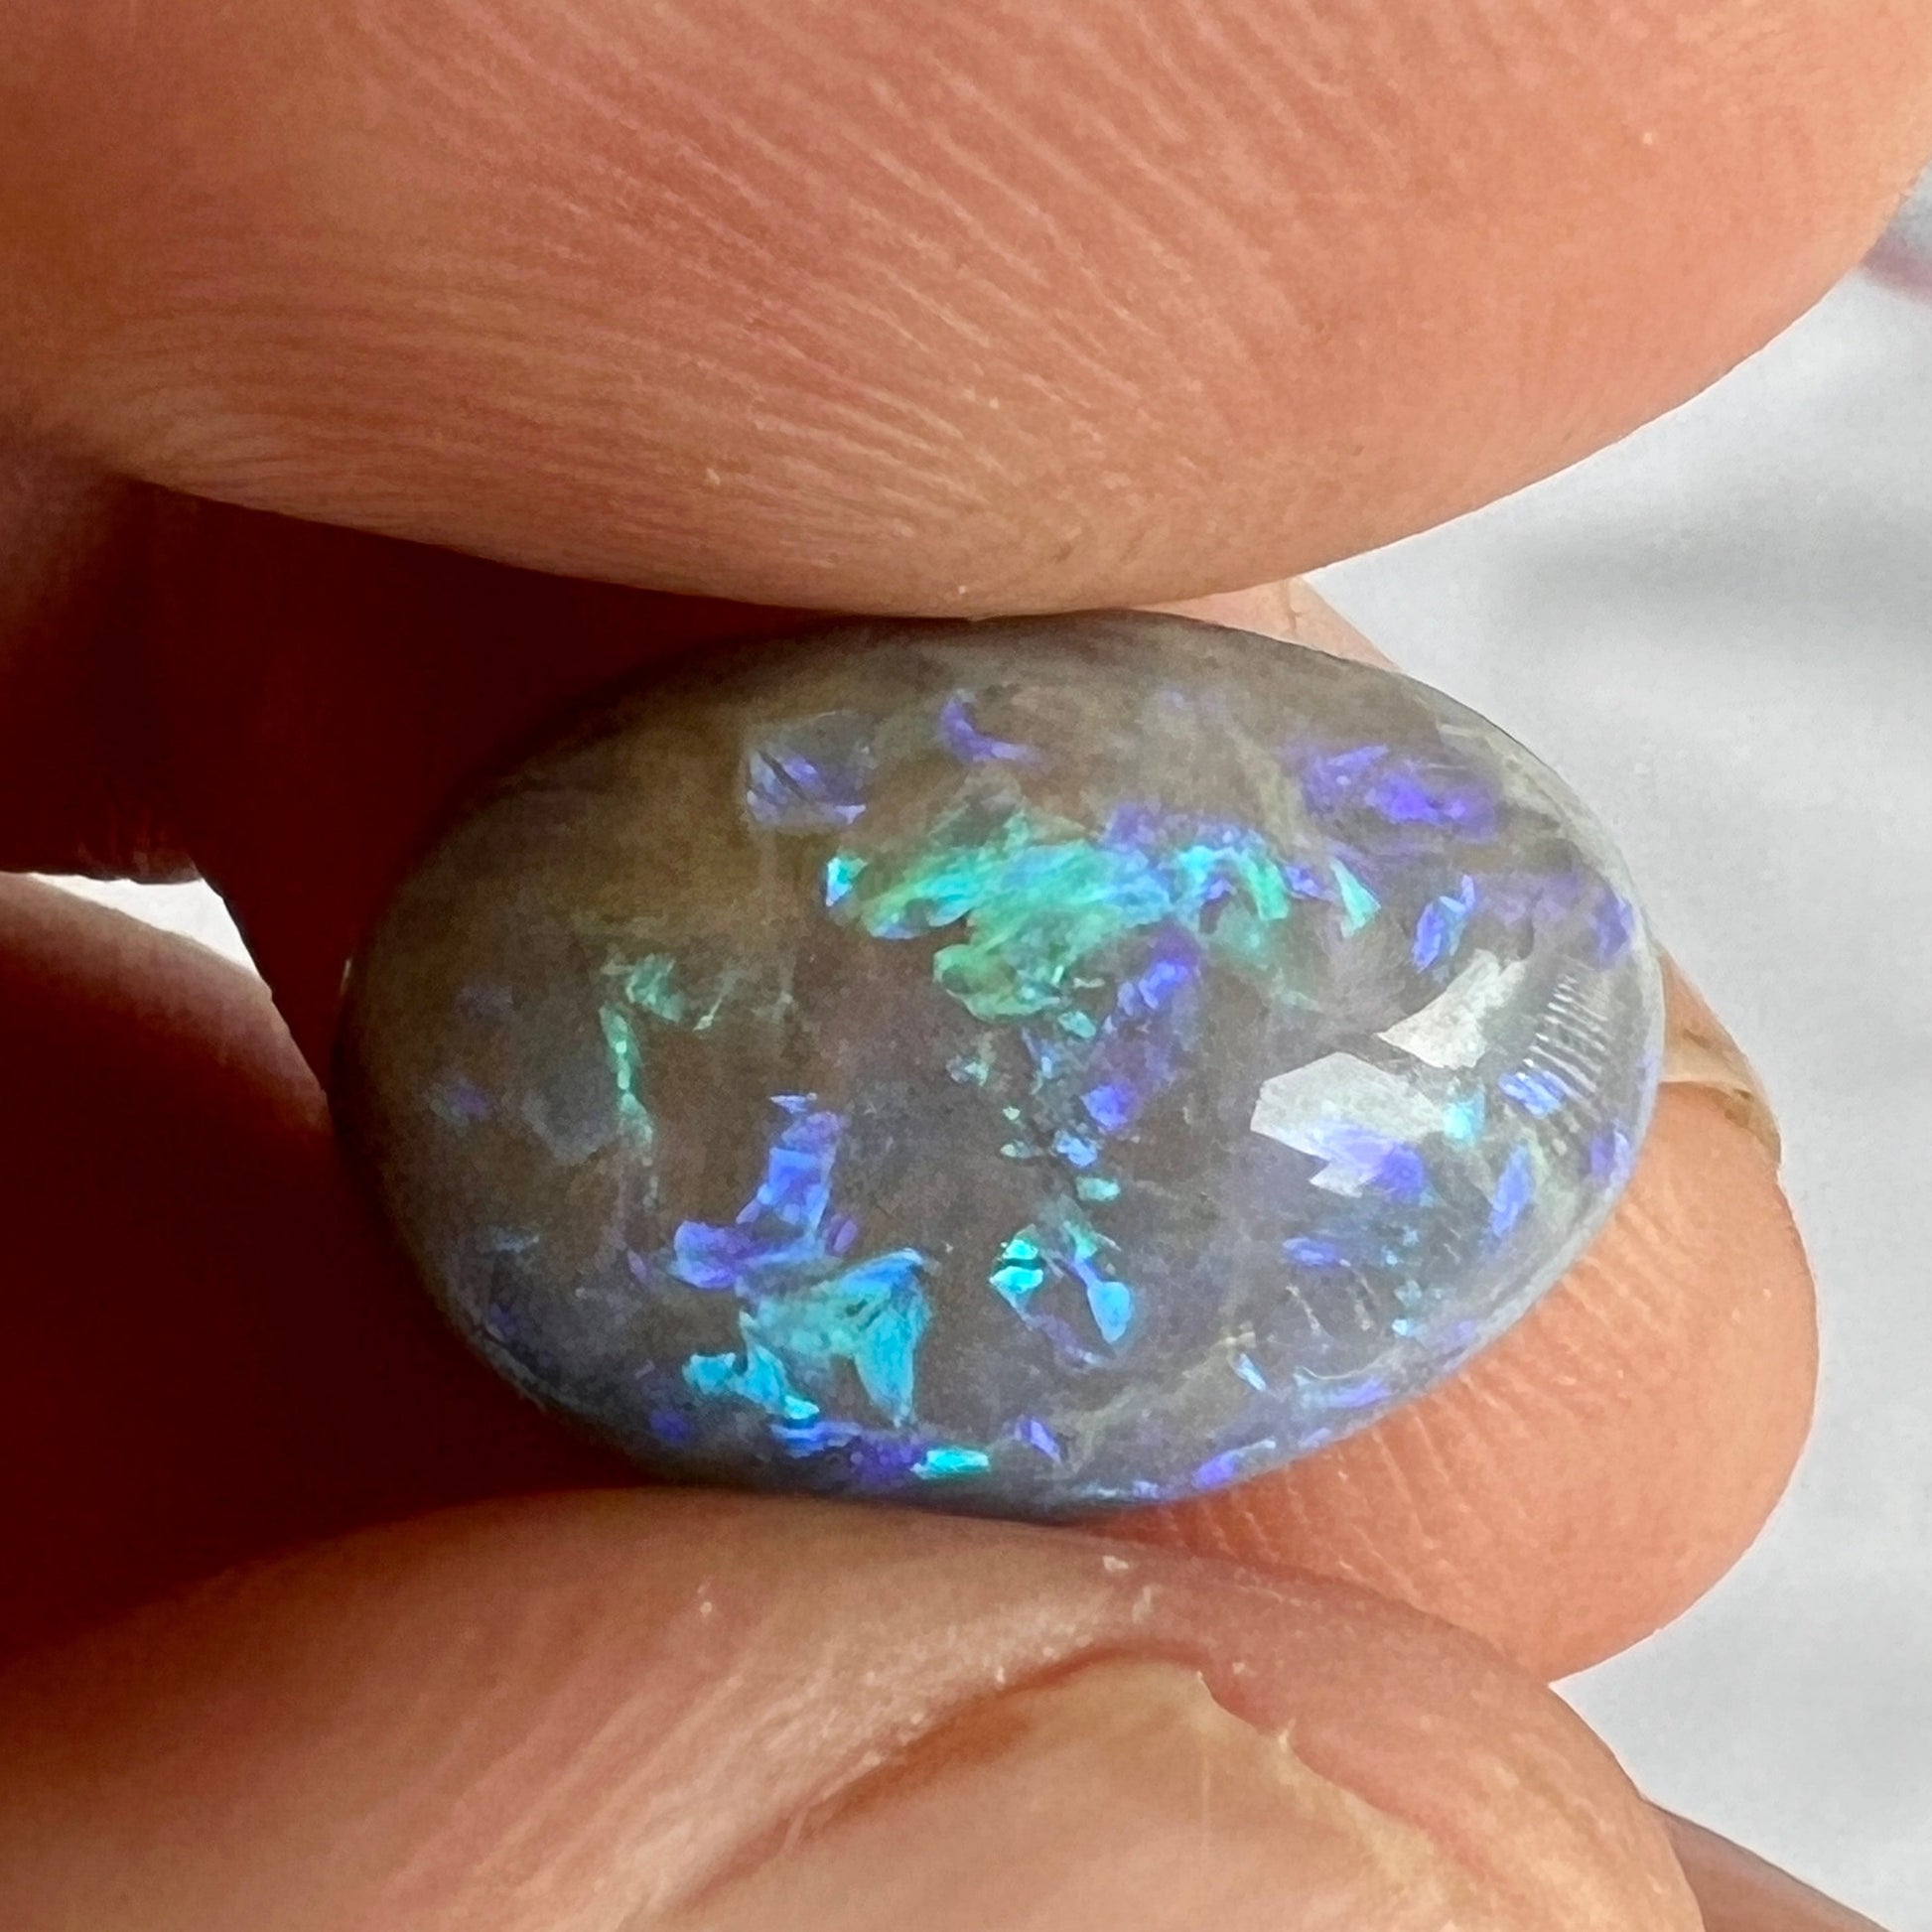 Beautiful Boulder Opal from the outback mining town of Quilpie, displaying stunning turquoise blues and purples.